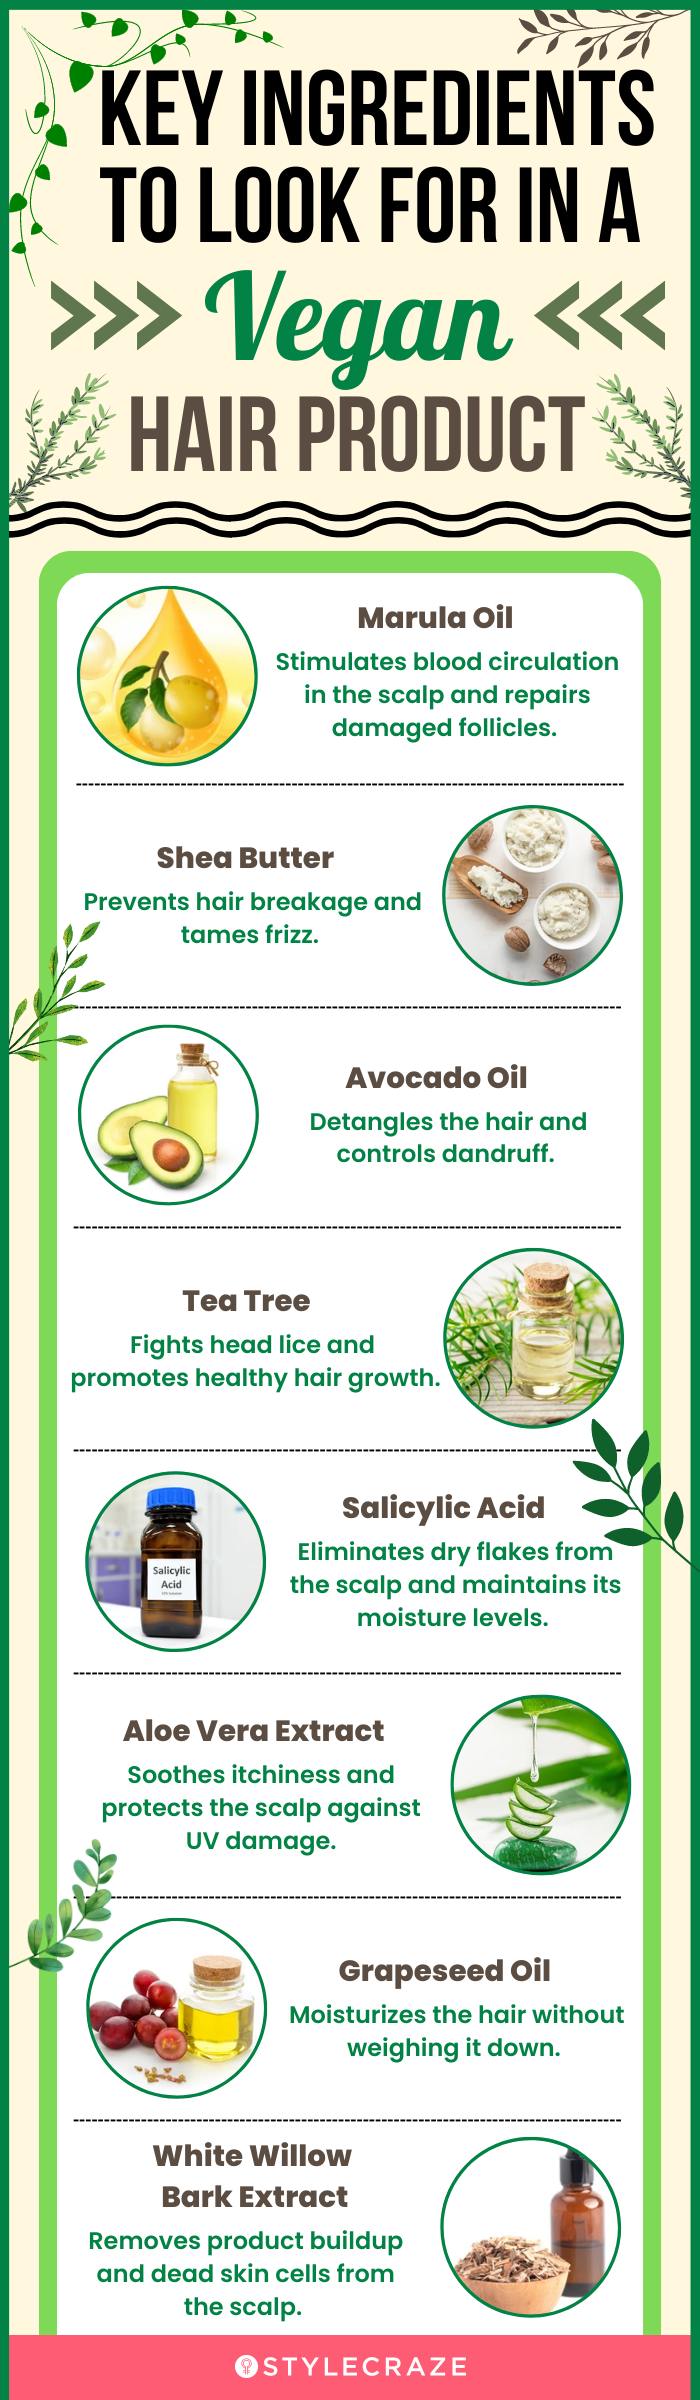 Key Ingredients To Look For In A Vegan Hair Product (infographic)